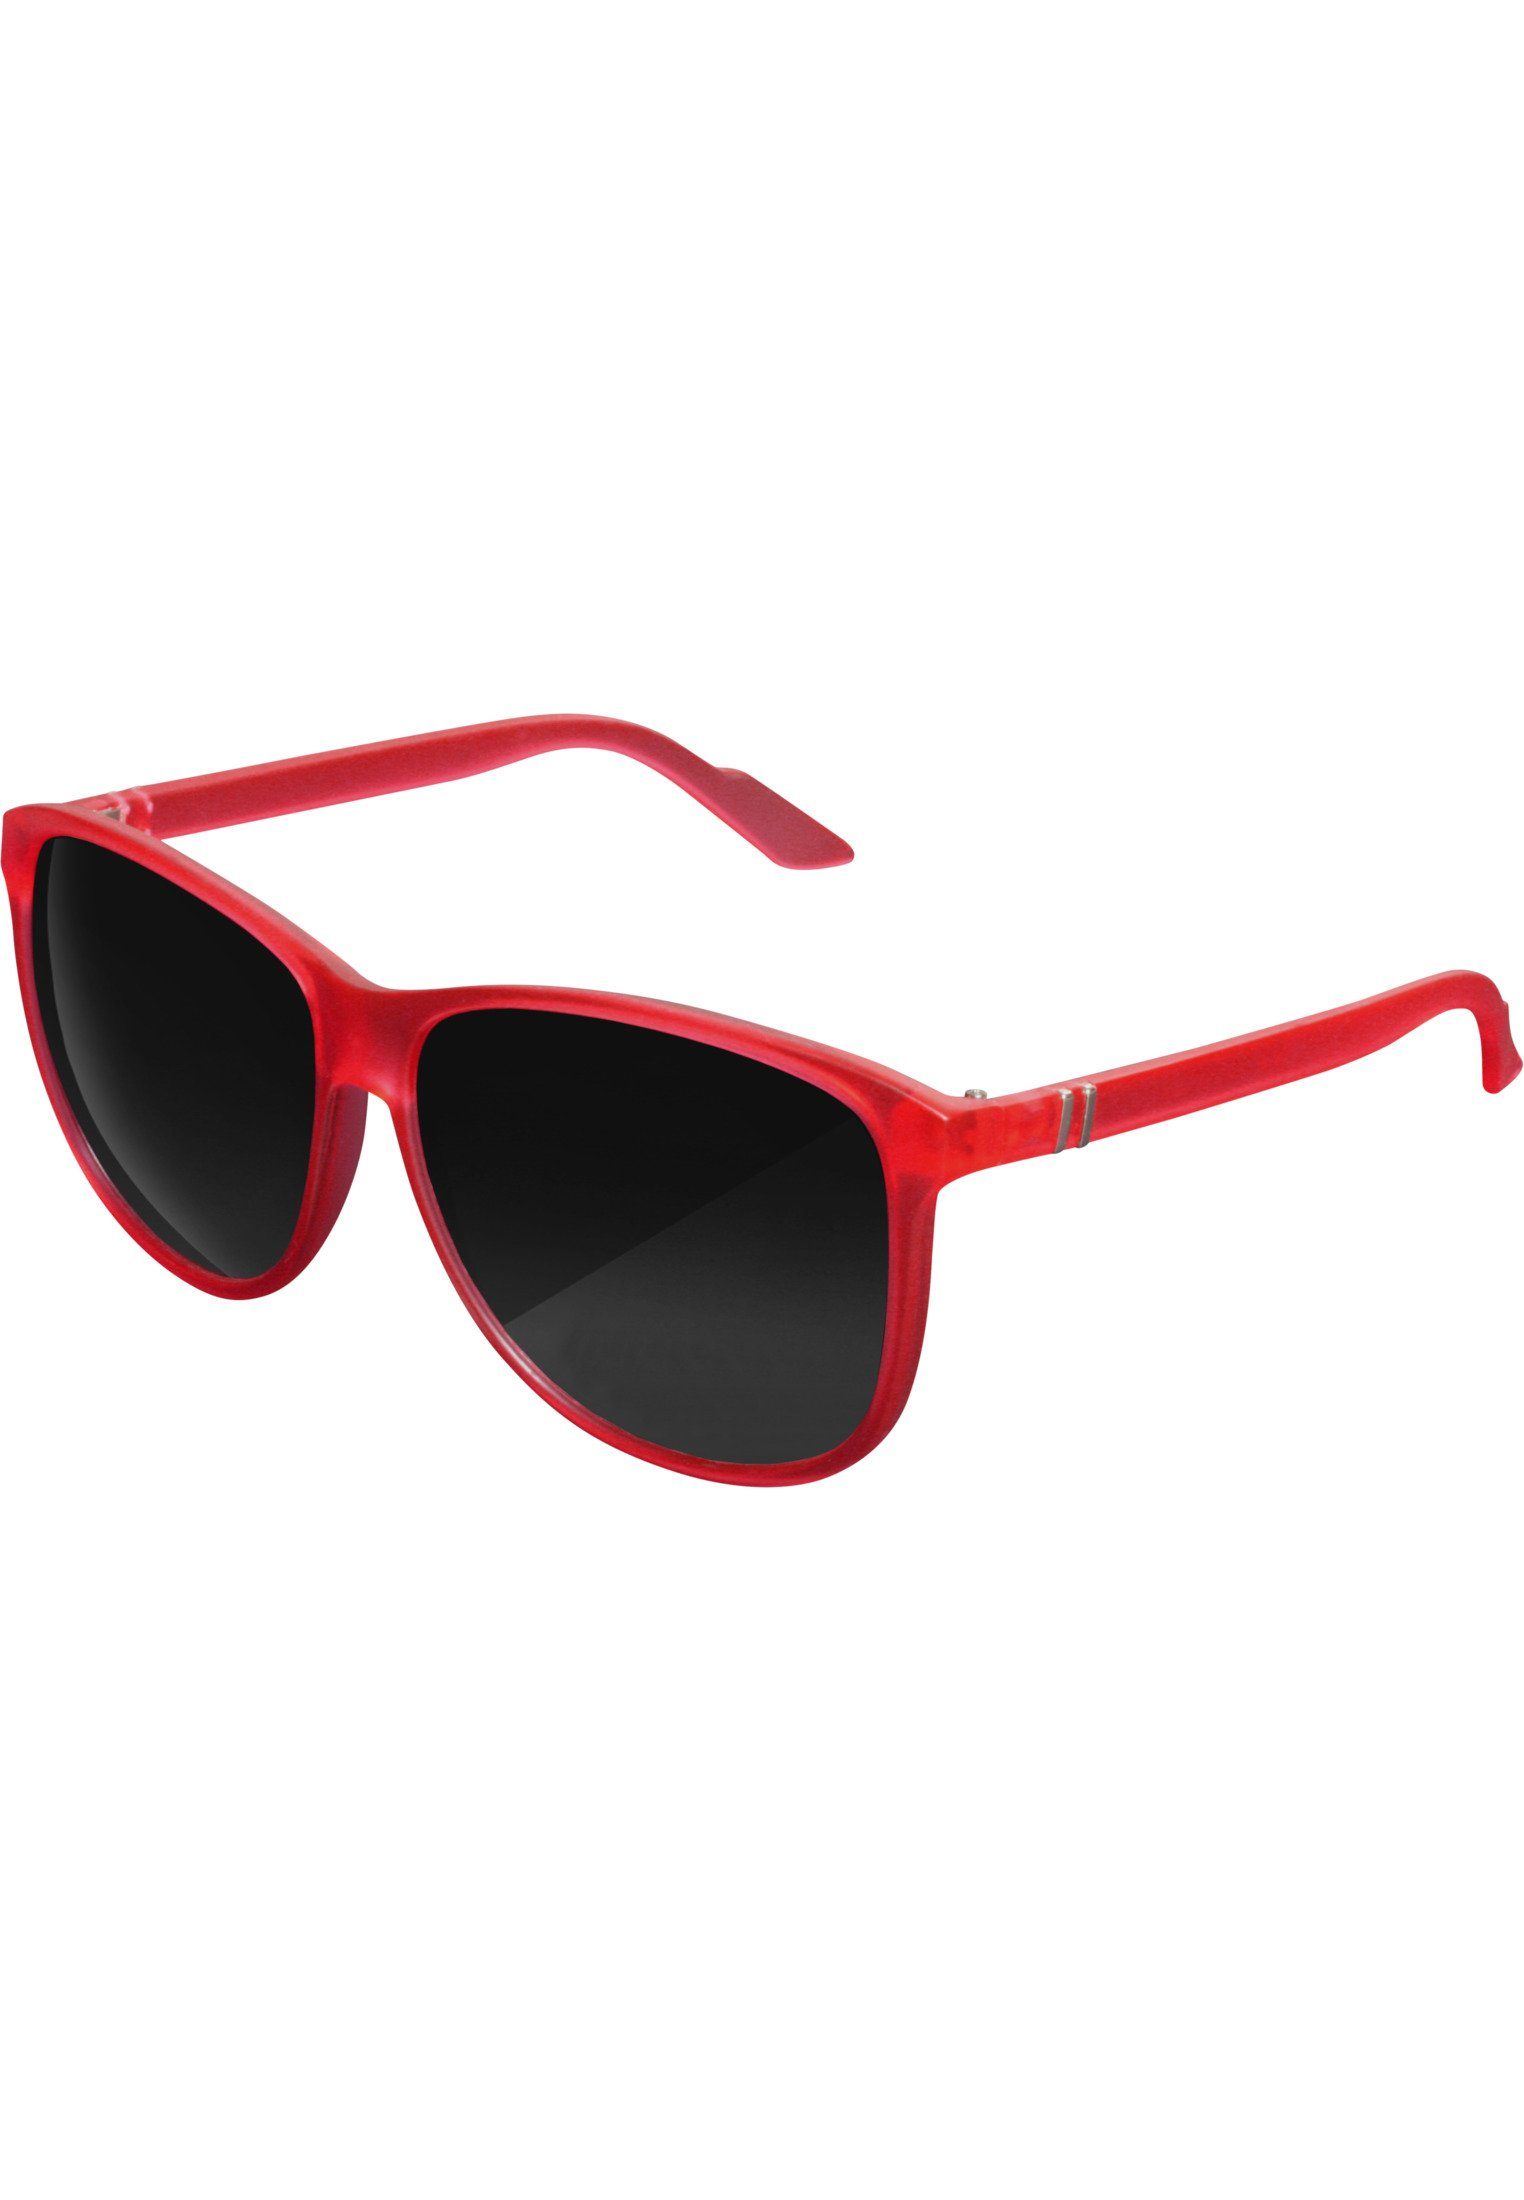 Sunglasses MSTRDS Chirwa Sonnenbrille red Accessoires